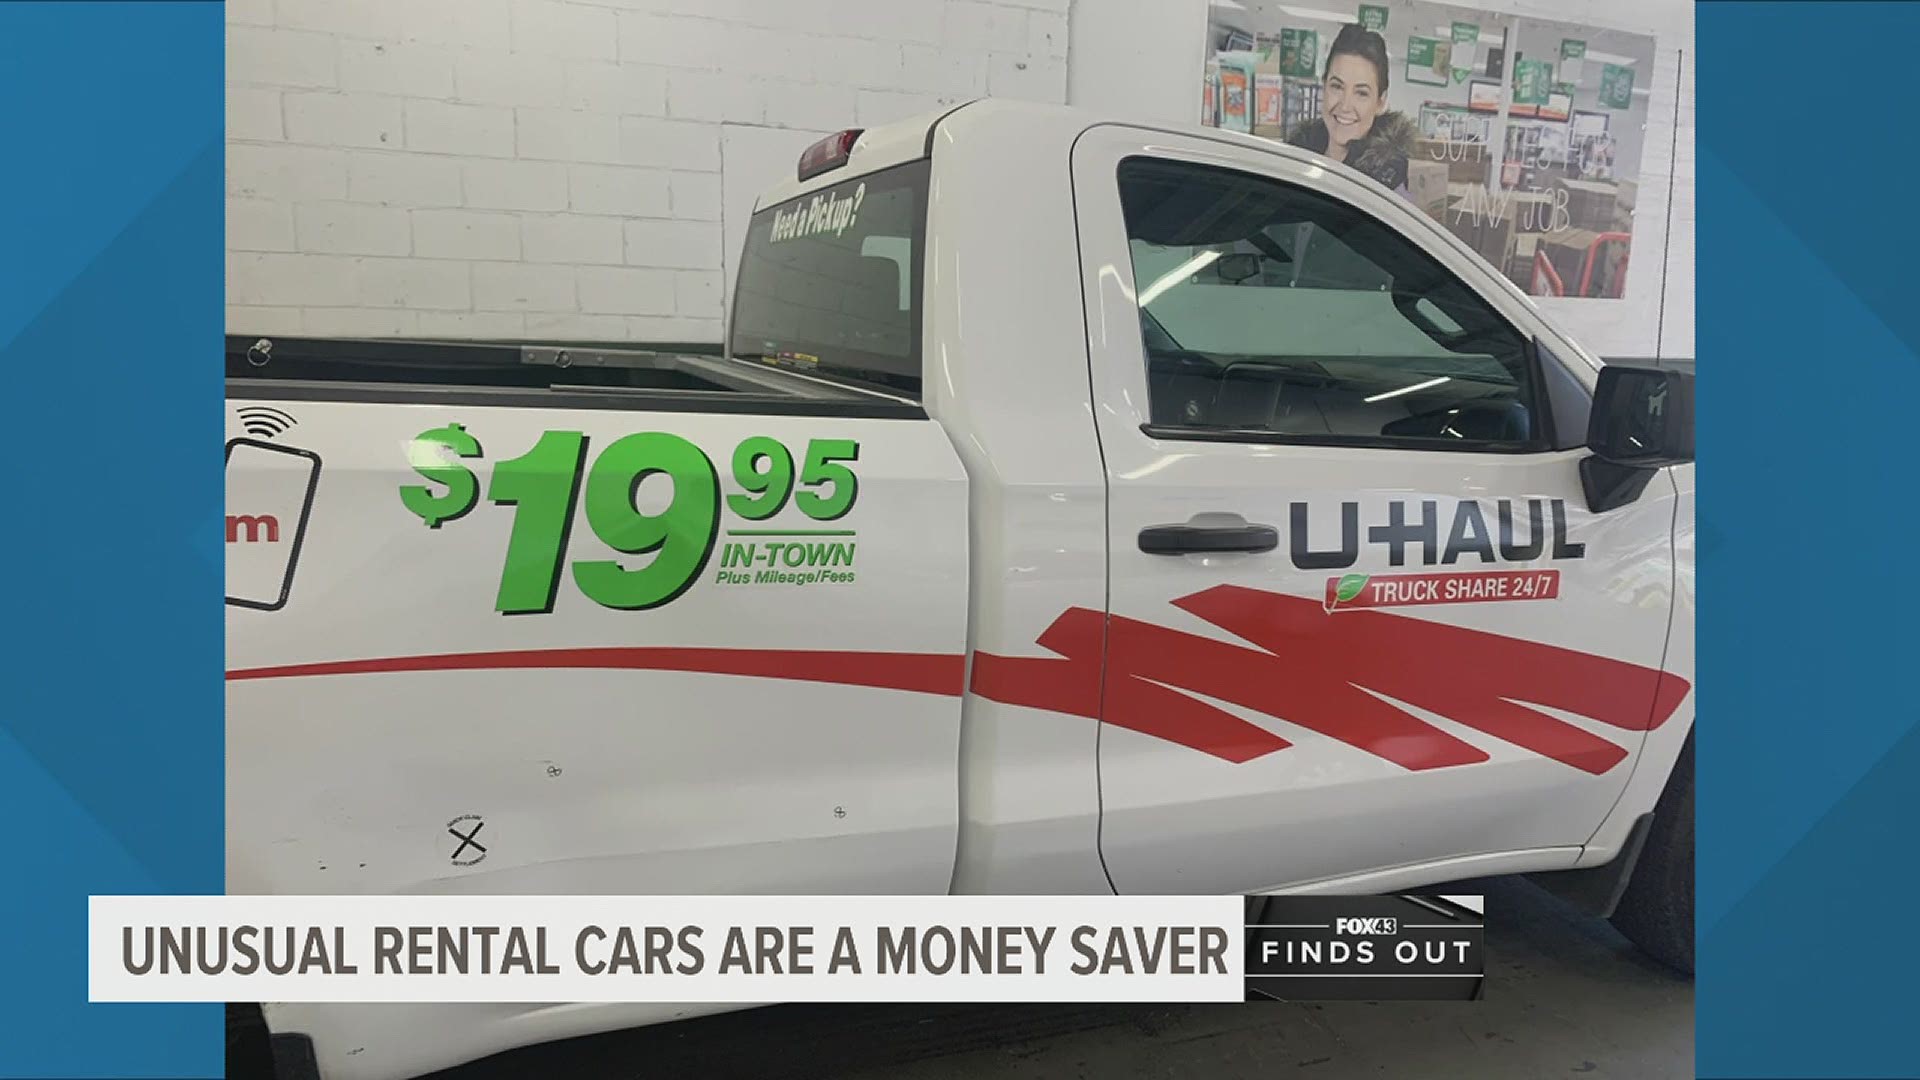 A rental car shortage is forcing people to find different ways to get around and vacation. FOX43 Finds Out looks at how some options can save you a lot of money.